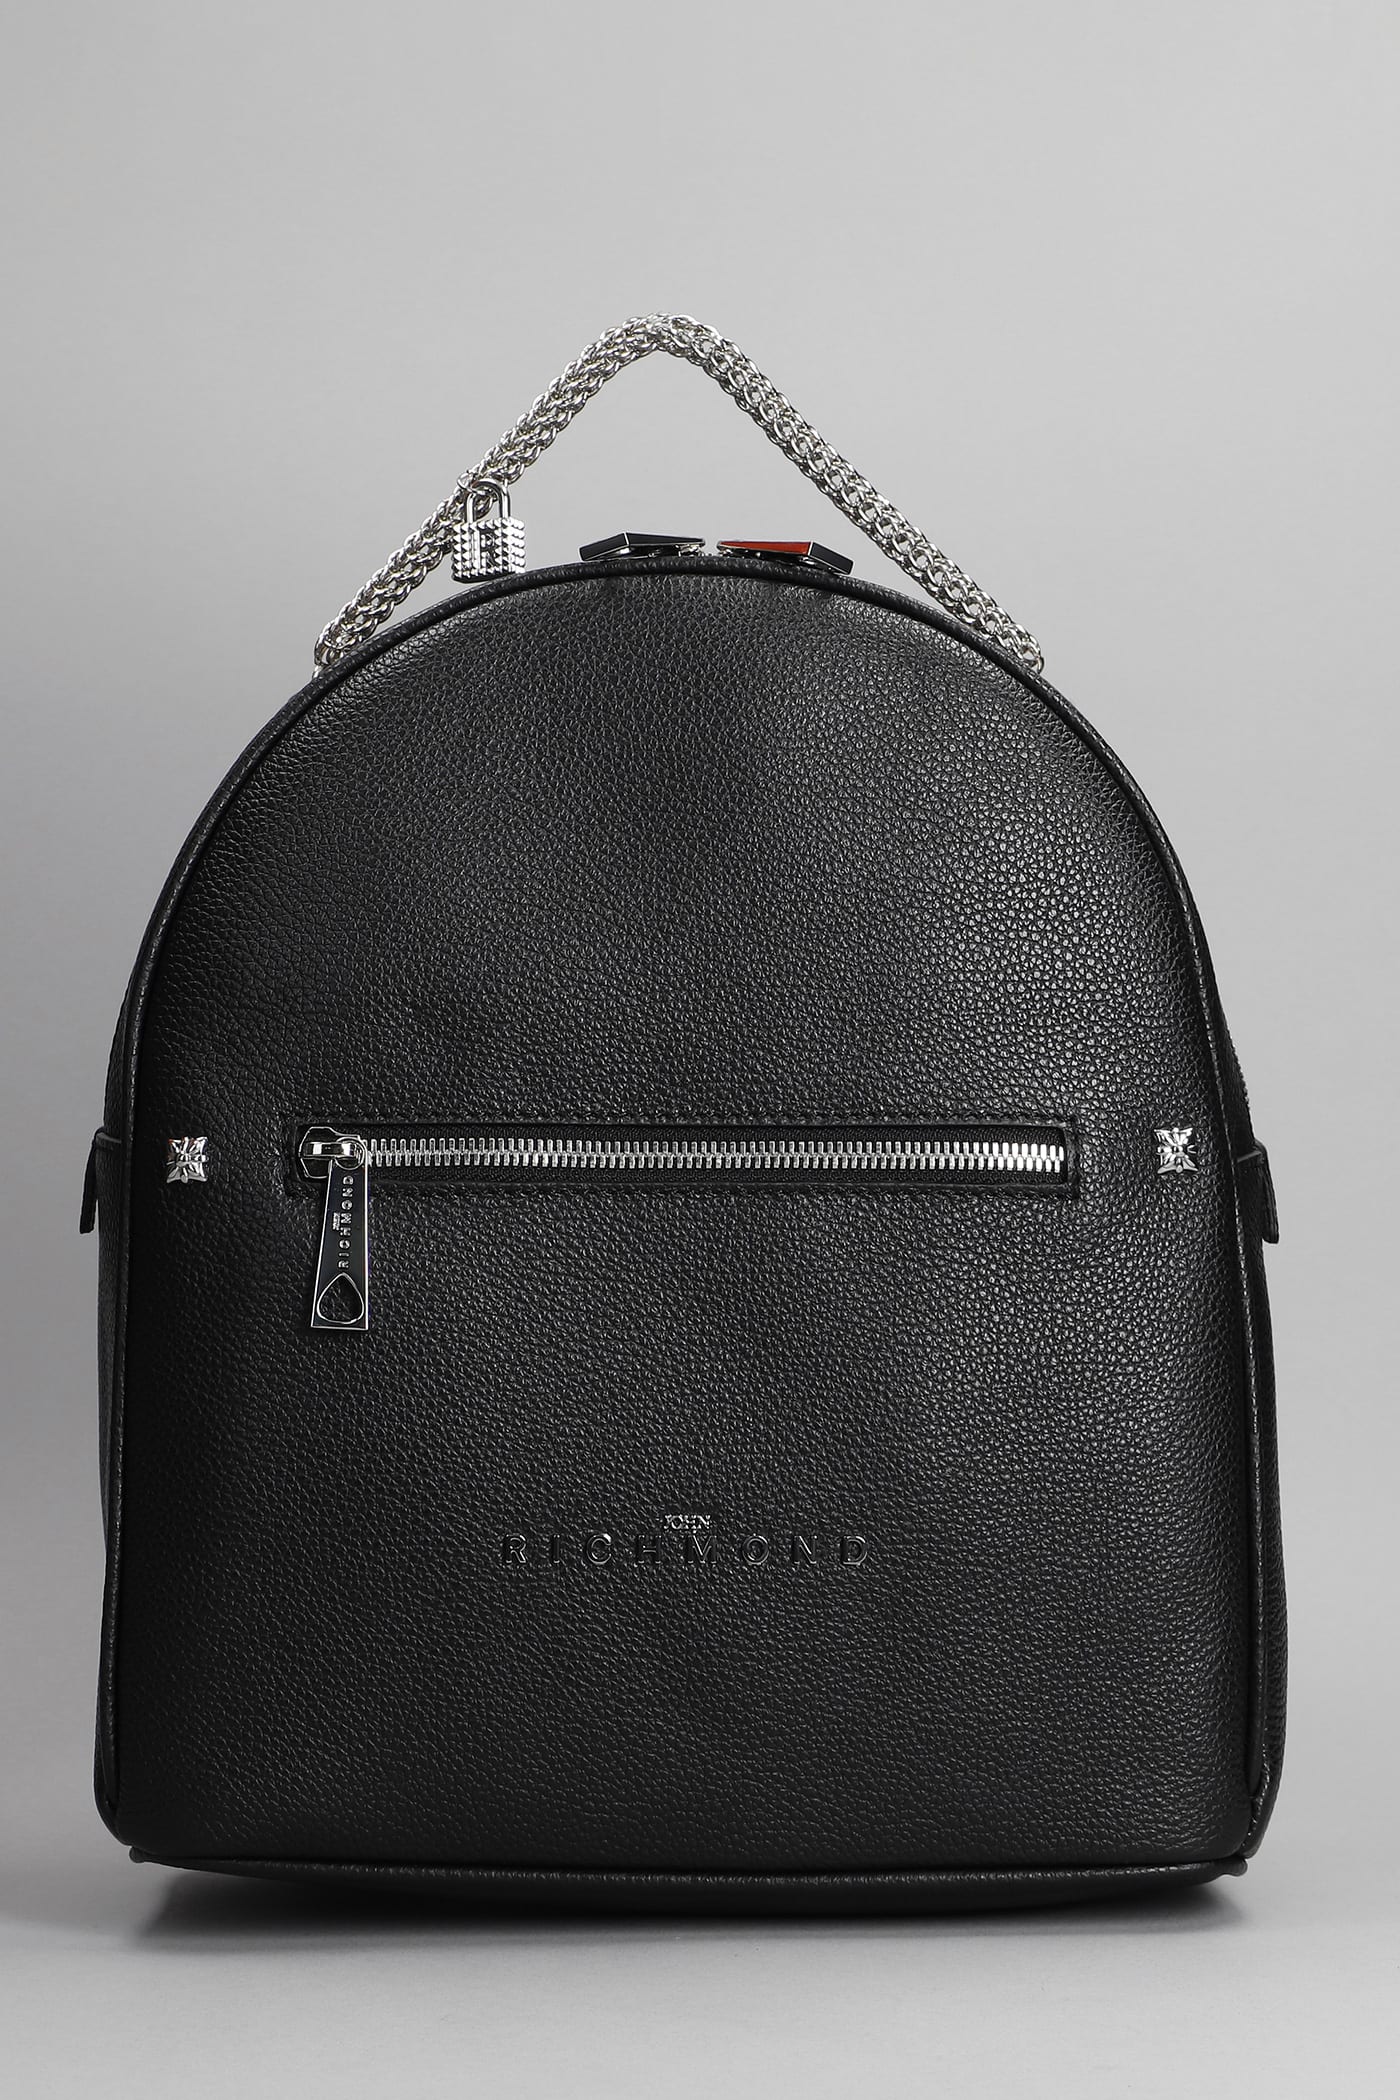 John Richmond Backpack In Black Leather